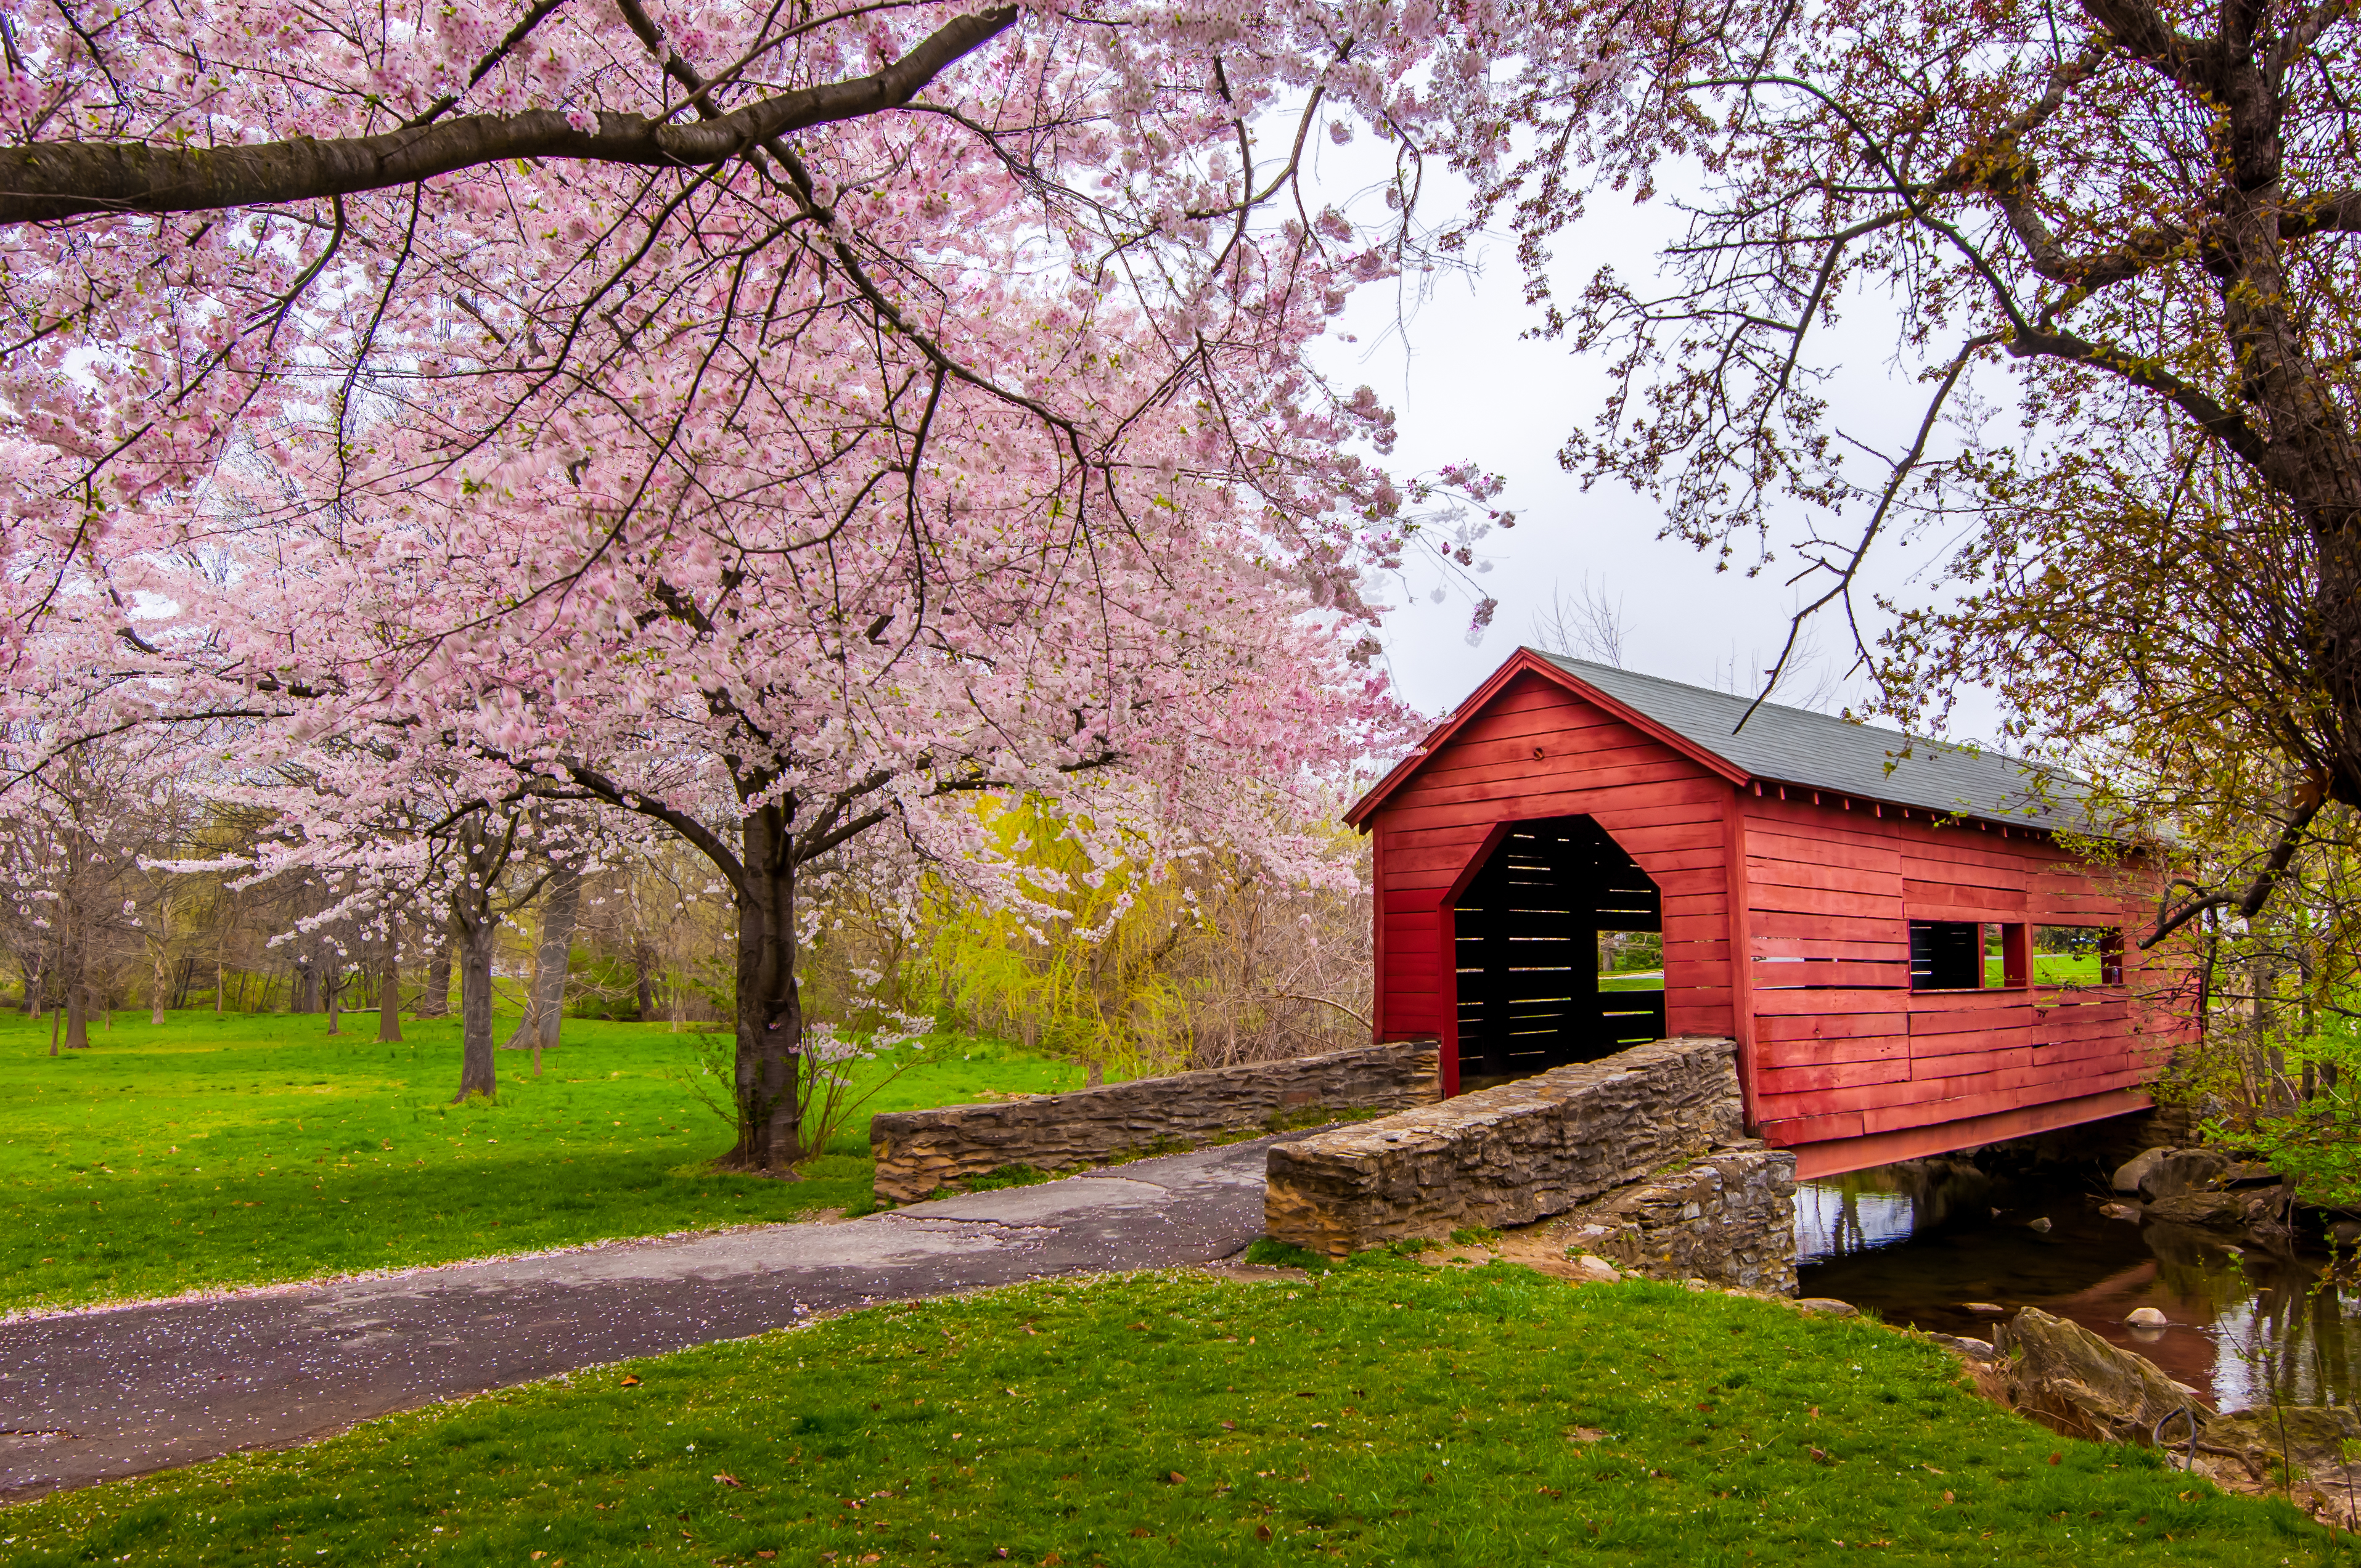 Old covered bridge in the spring with pink flowering trees